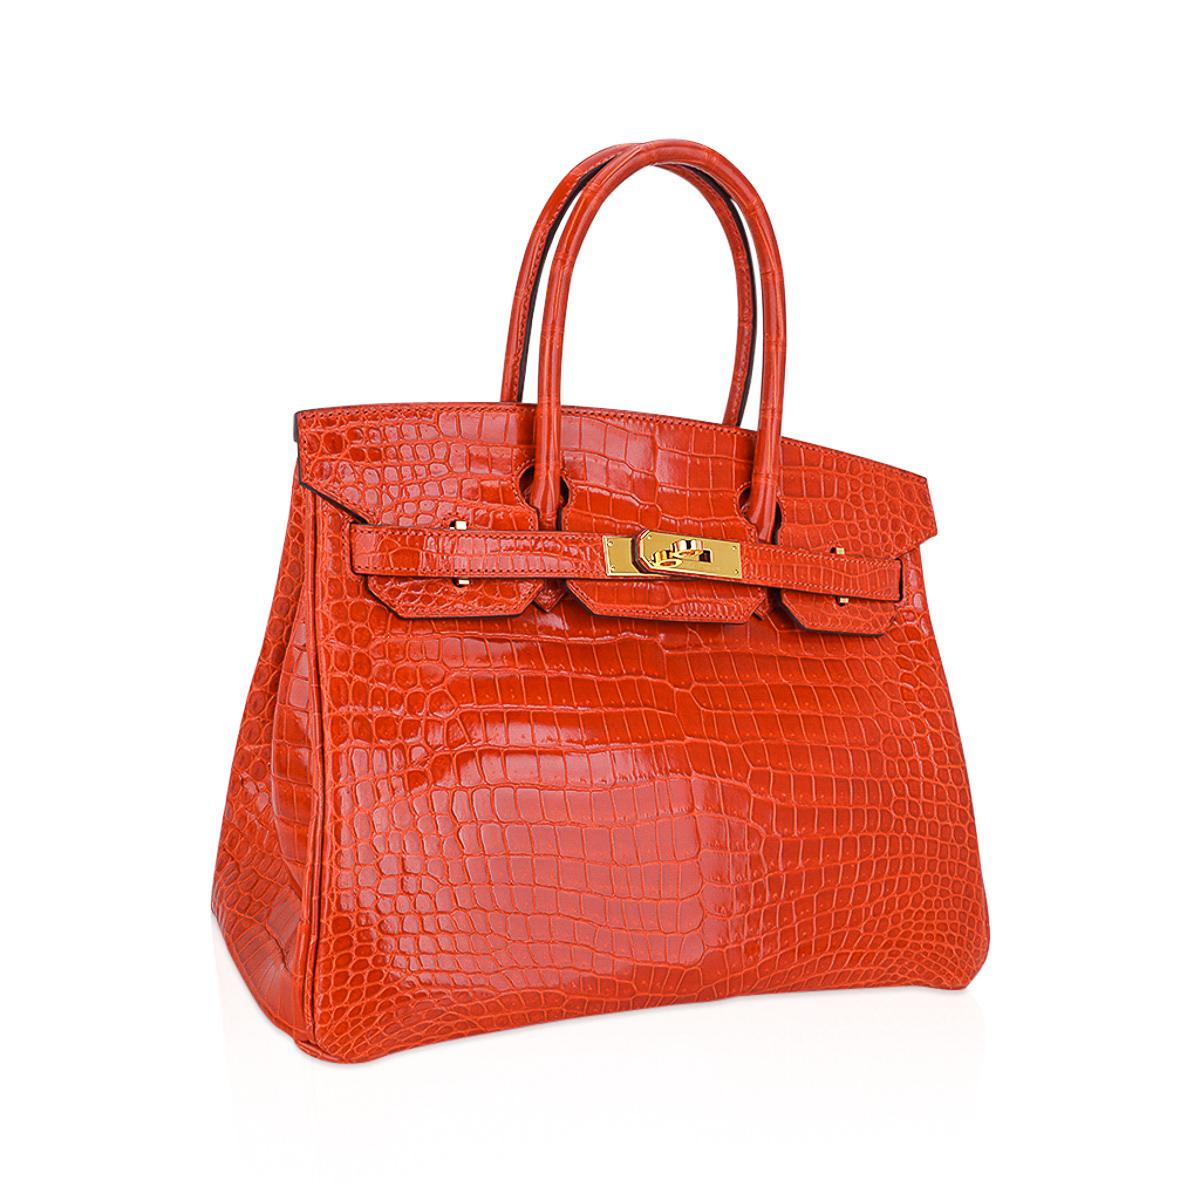 Mightychic offers an Hermes Birkin 30 bag is featured in Orange Poppy Porosus Crocodile. 
This vibrant Orange Hermes Birkin bag in crocodile lisse skin with lush gold hardware is magnificent with beautiful scales!
Clean body, handles, corners and